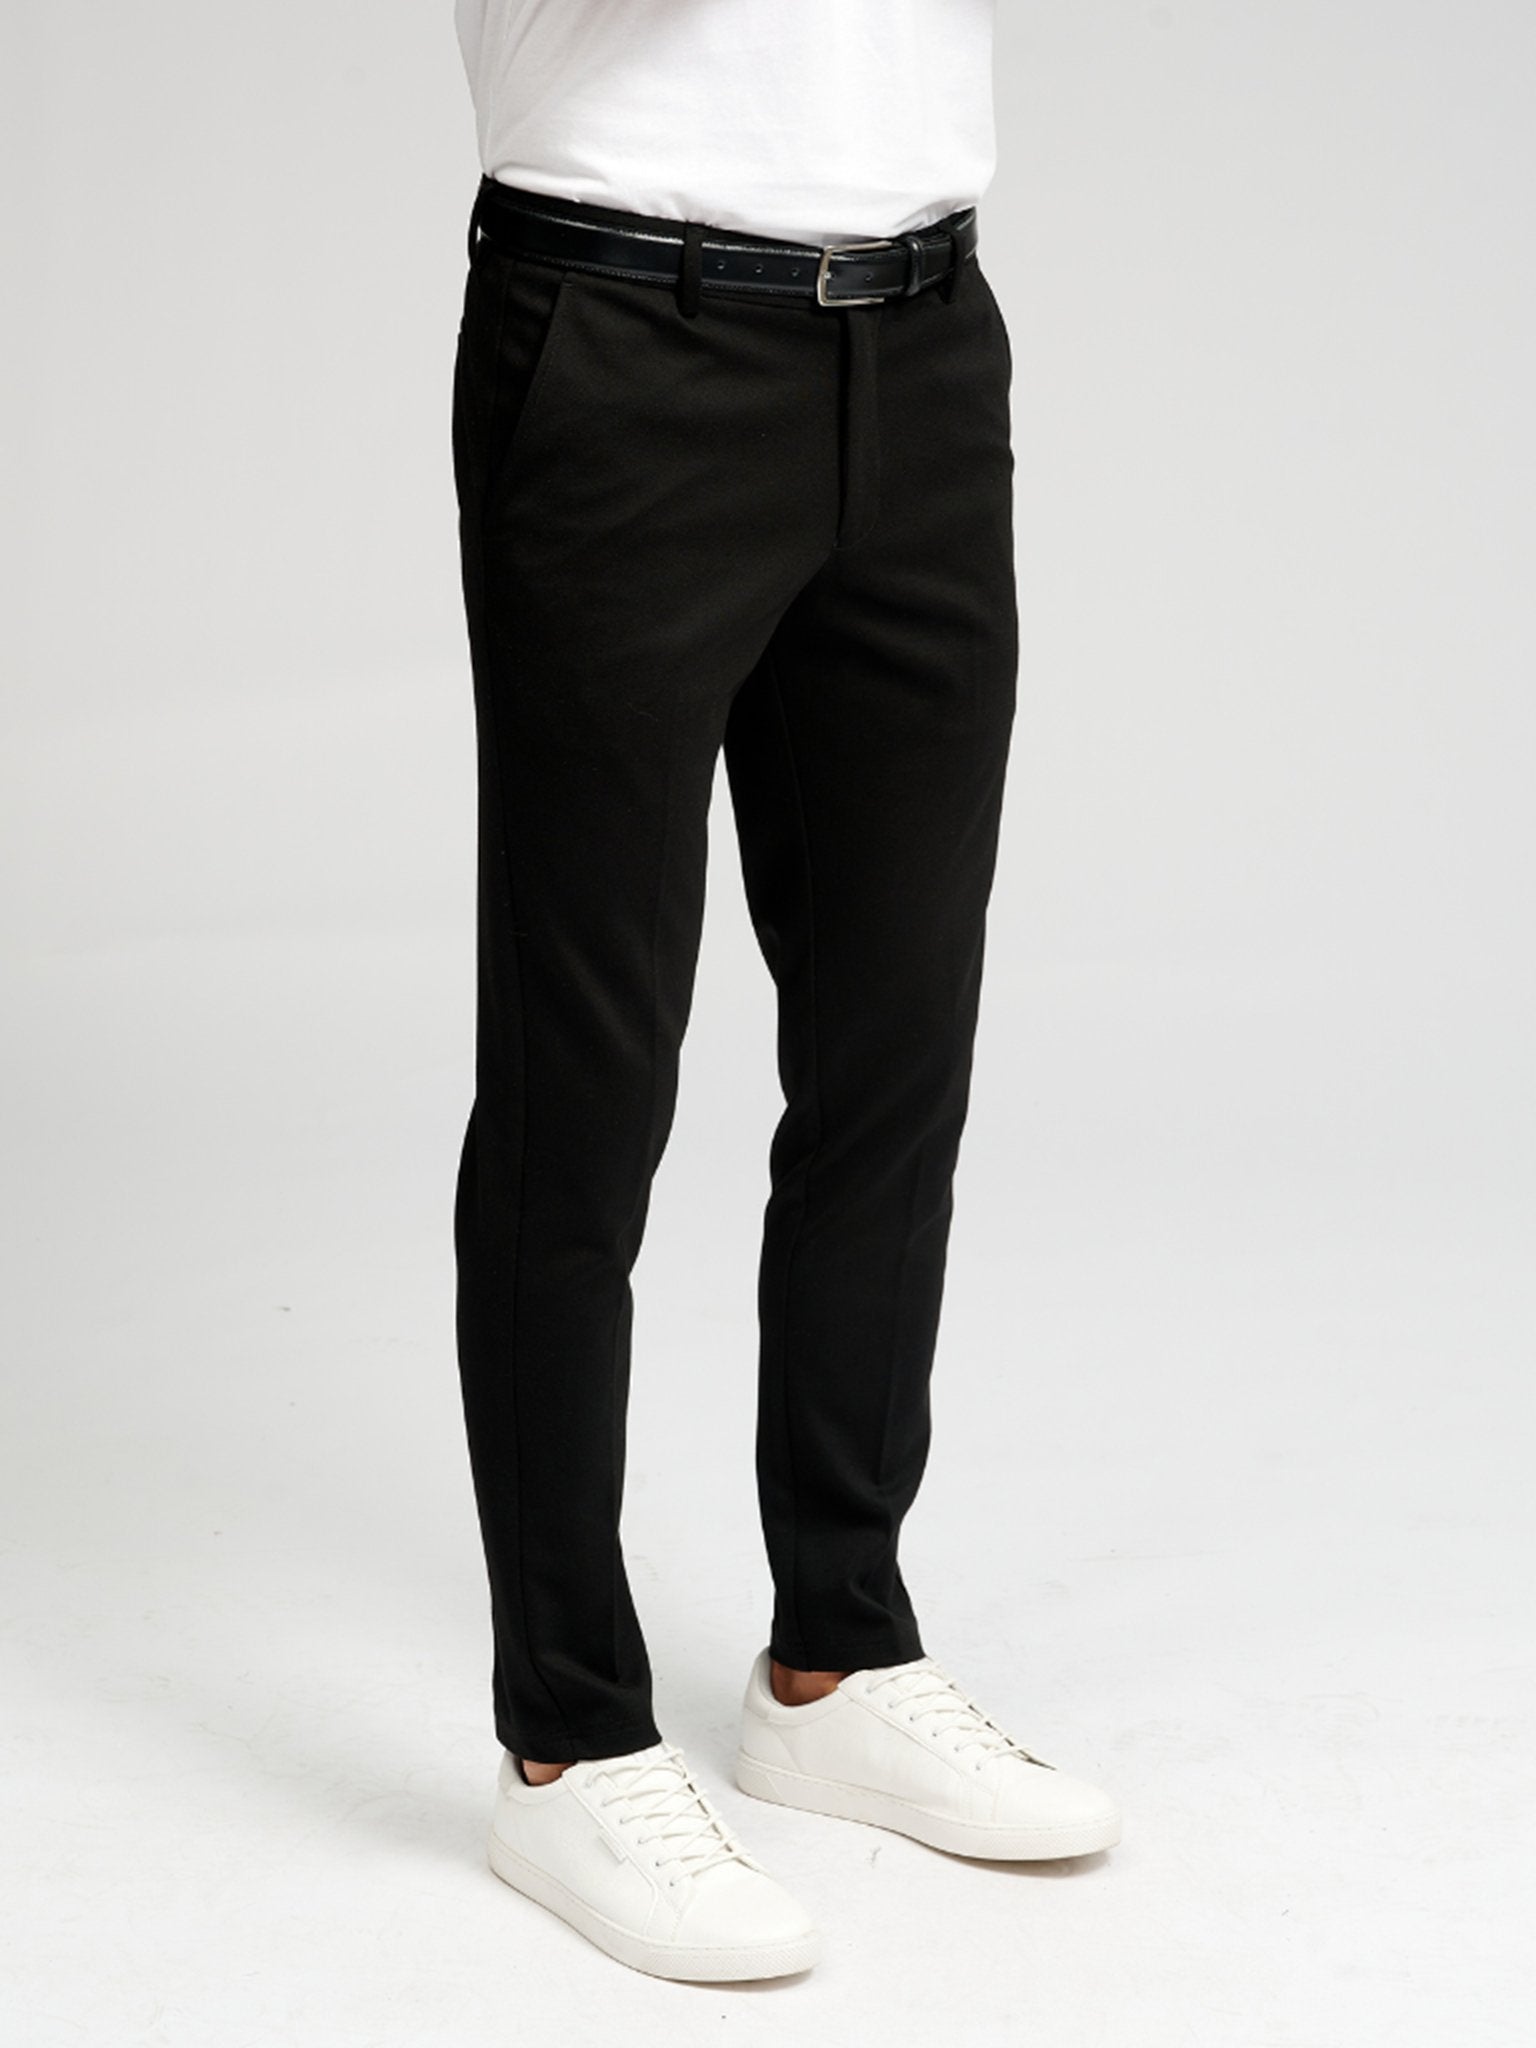 Redefining Office Attire: The Role of Performance Pants